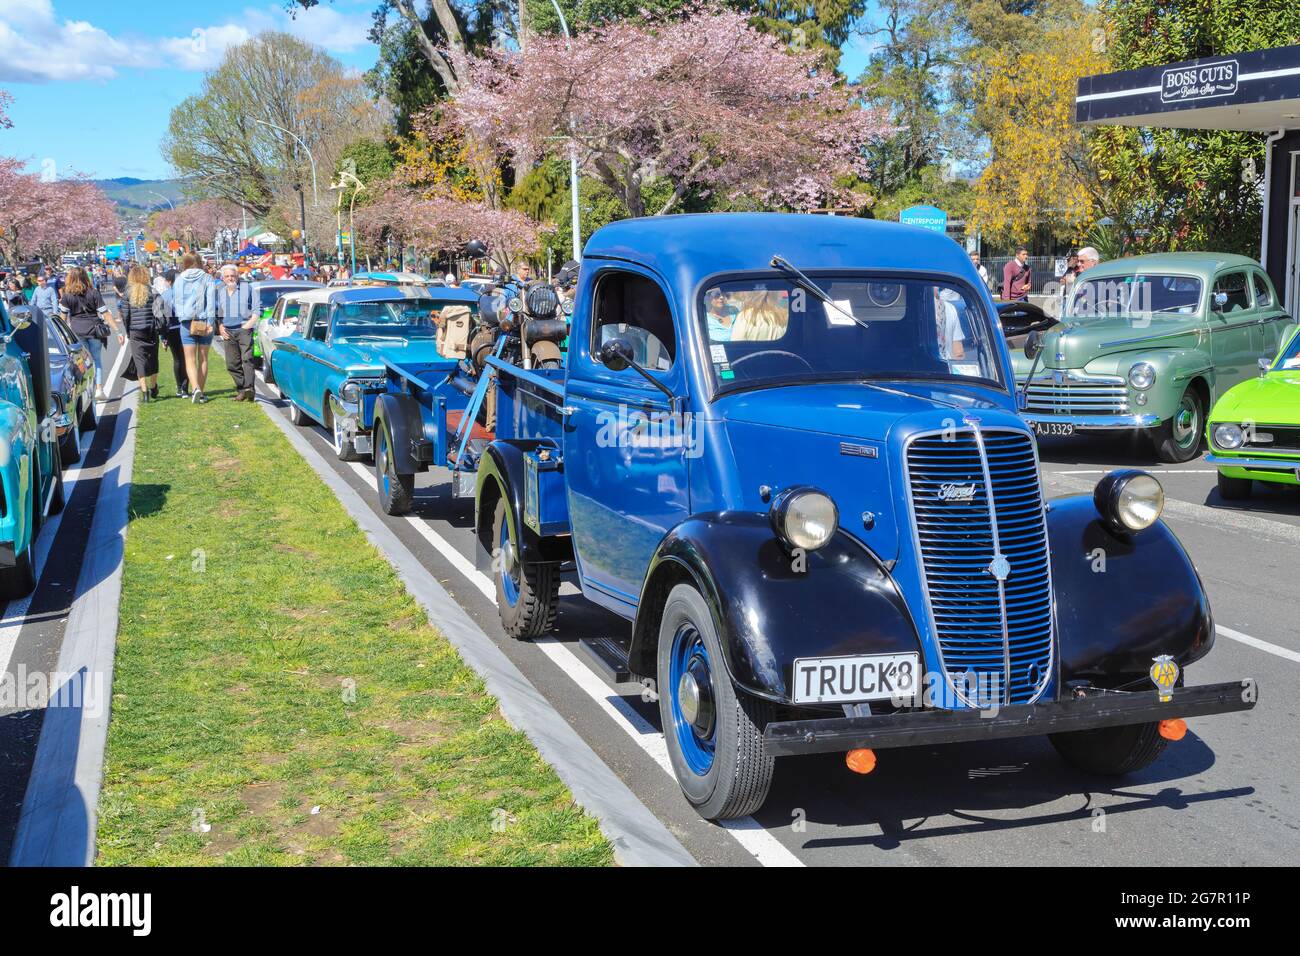 A 1948 Ford Fordson truck with other vintage vehicles at an outdoor classic car show Stock Photo